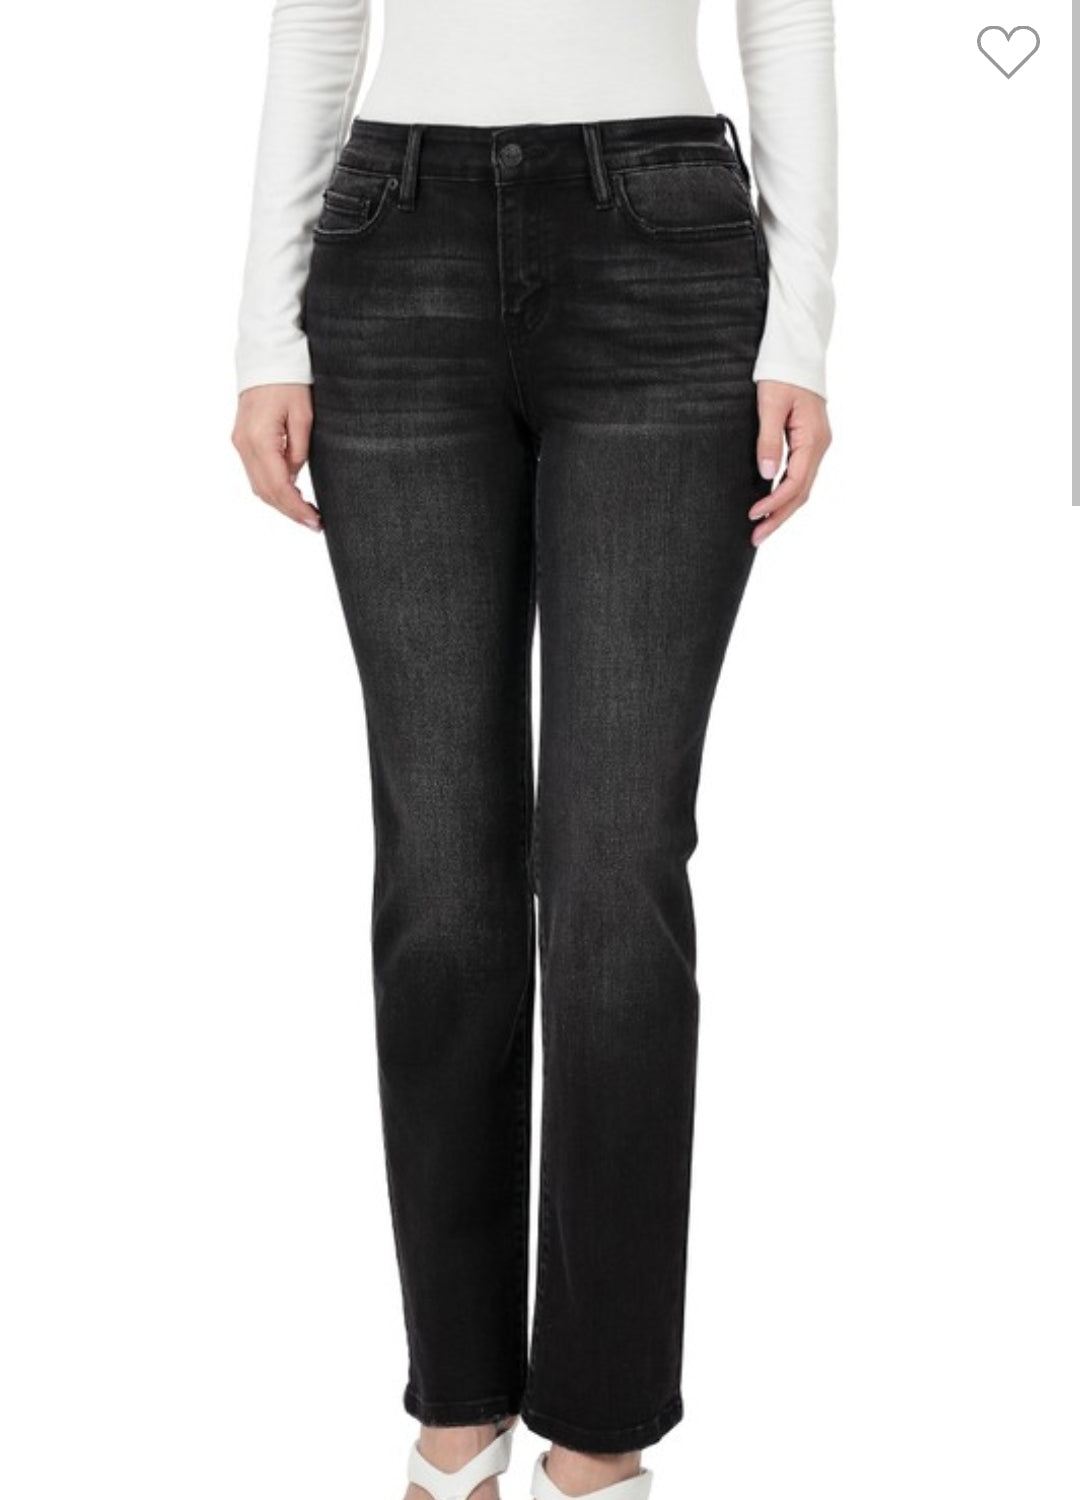 Anna Washed Black Straight Leg Jeans * on sale